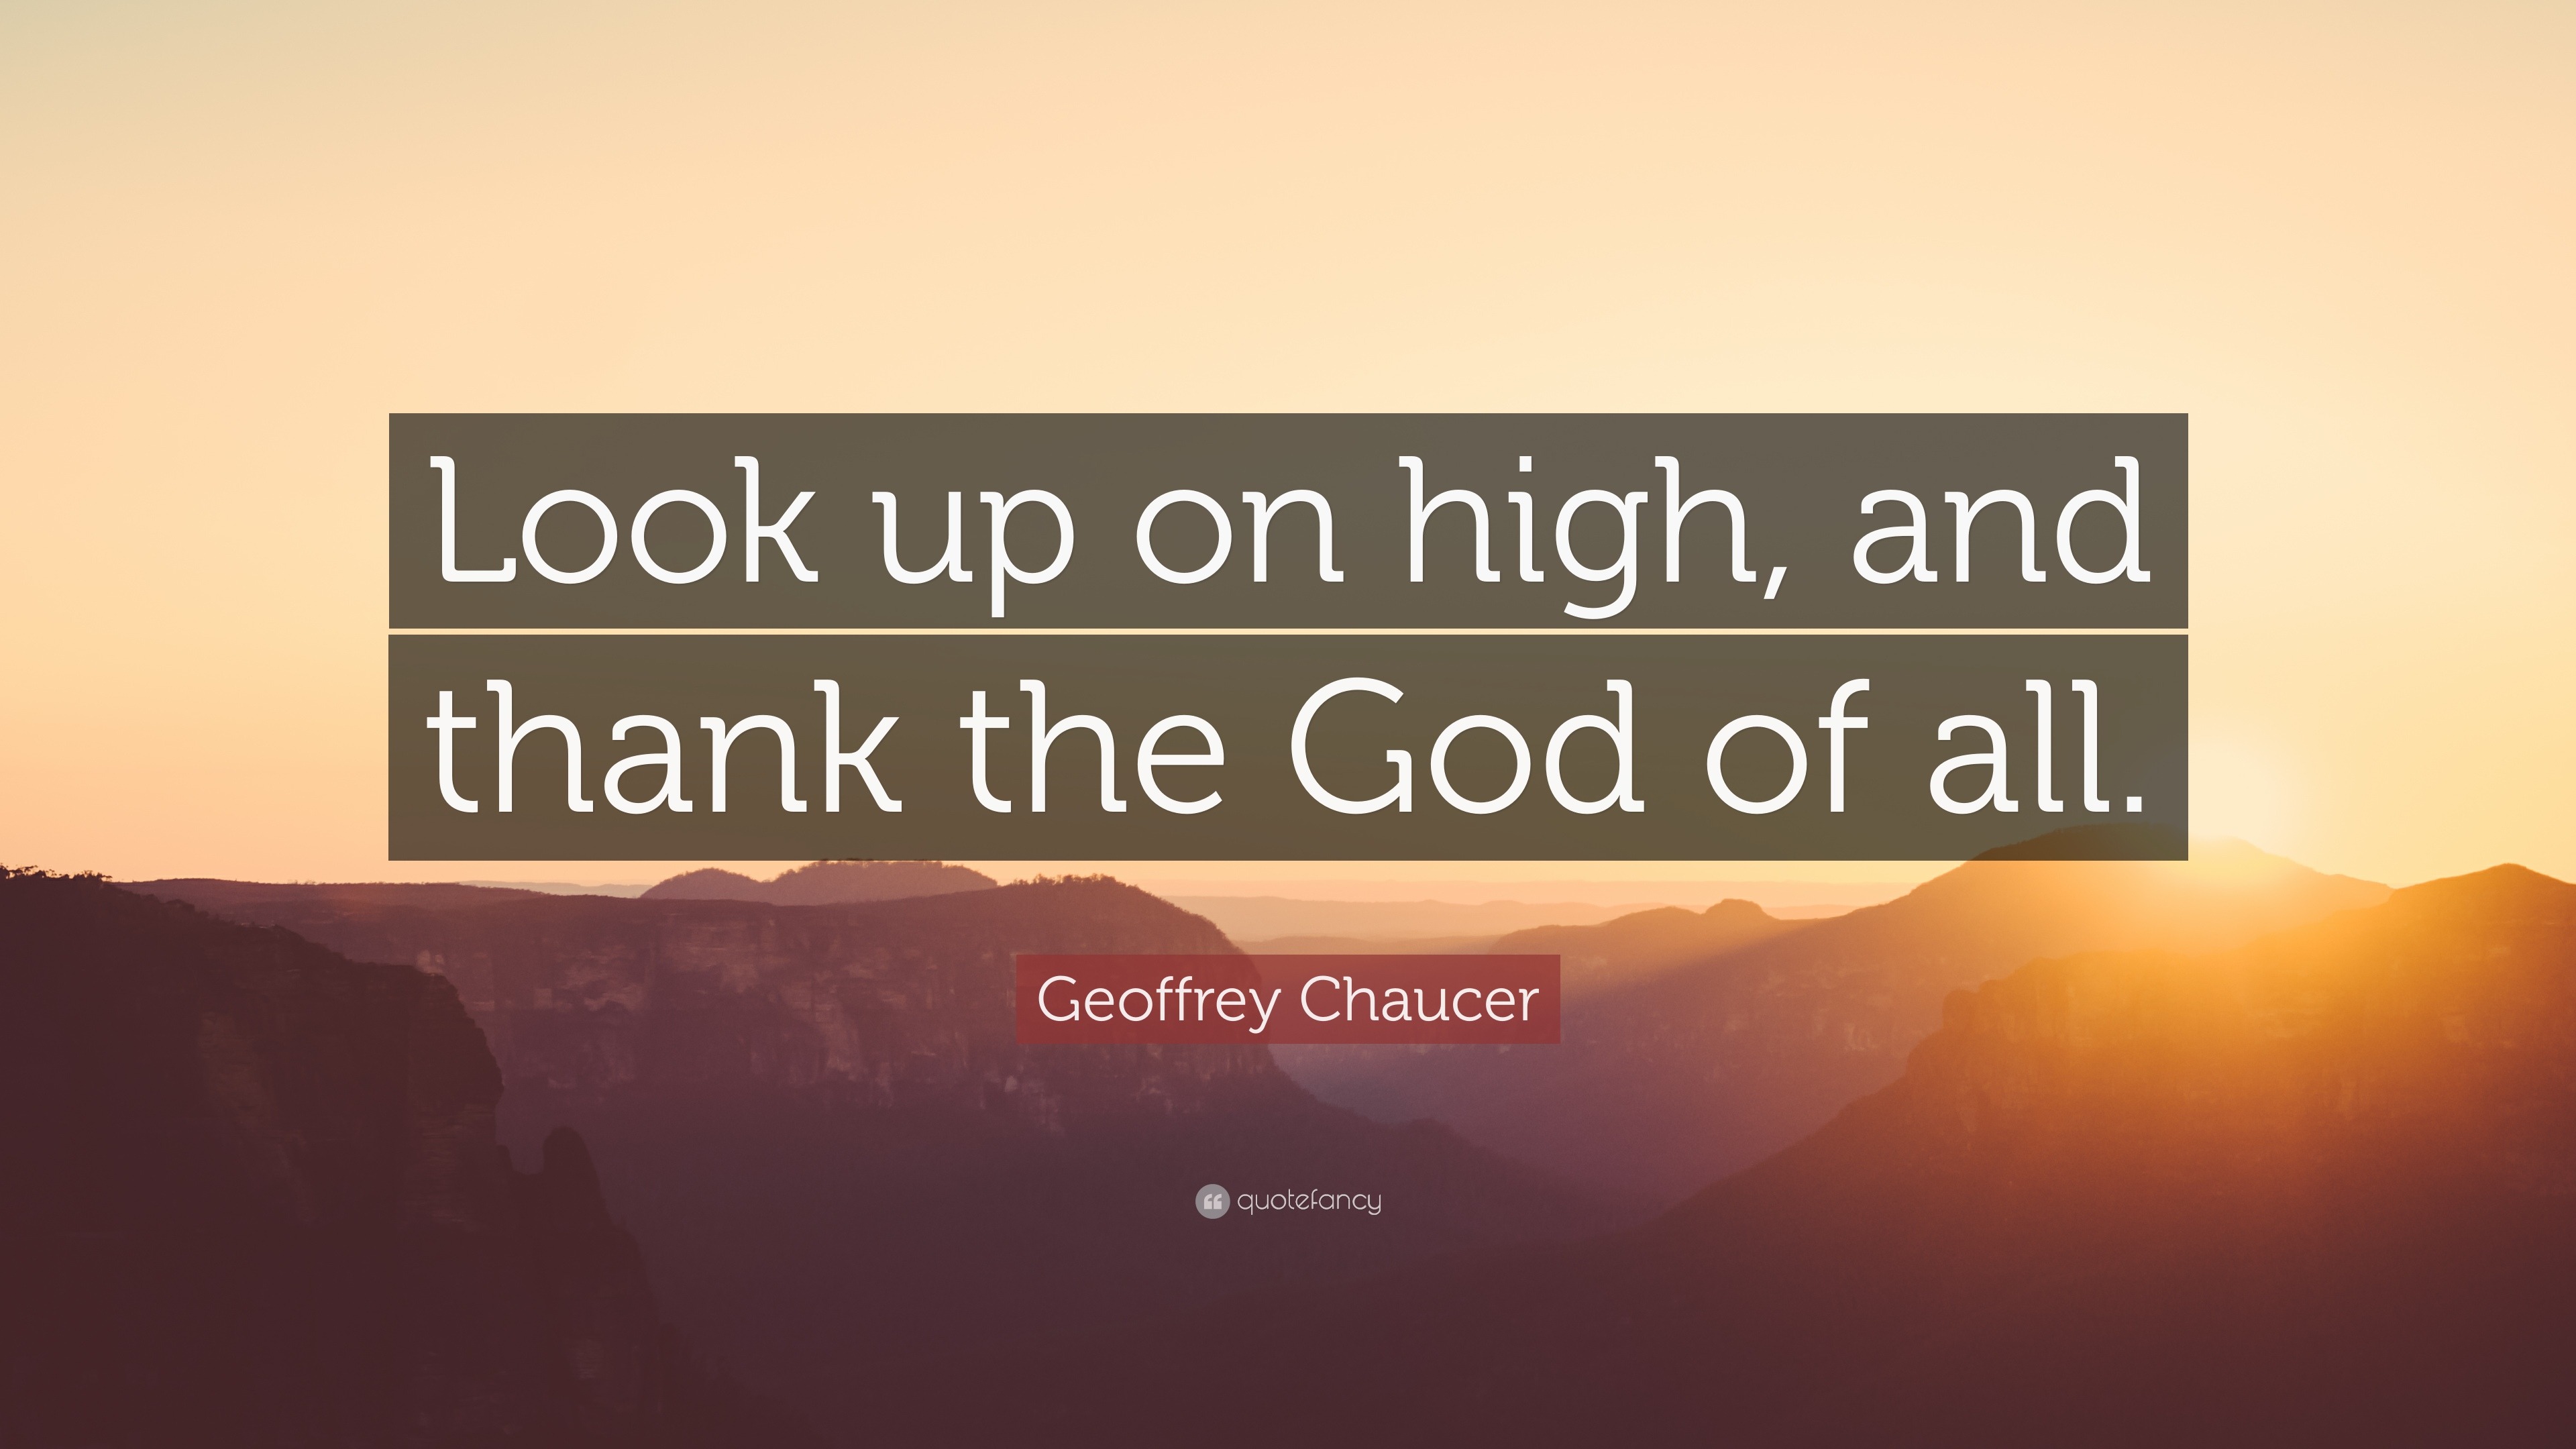 Geoffrey Chaucer Quote Look Up On High And Thank The God Of All